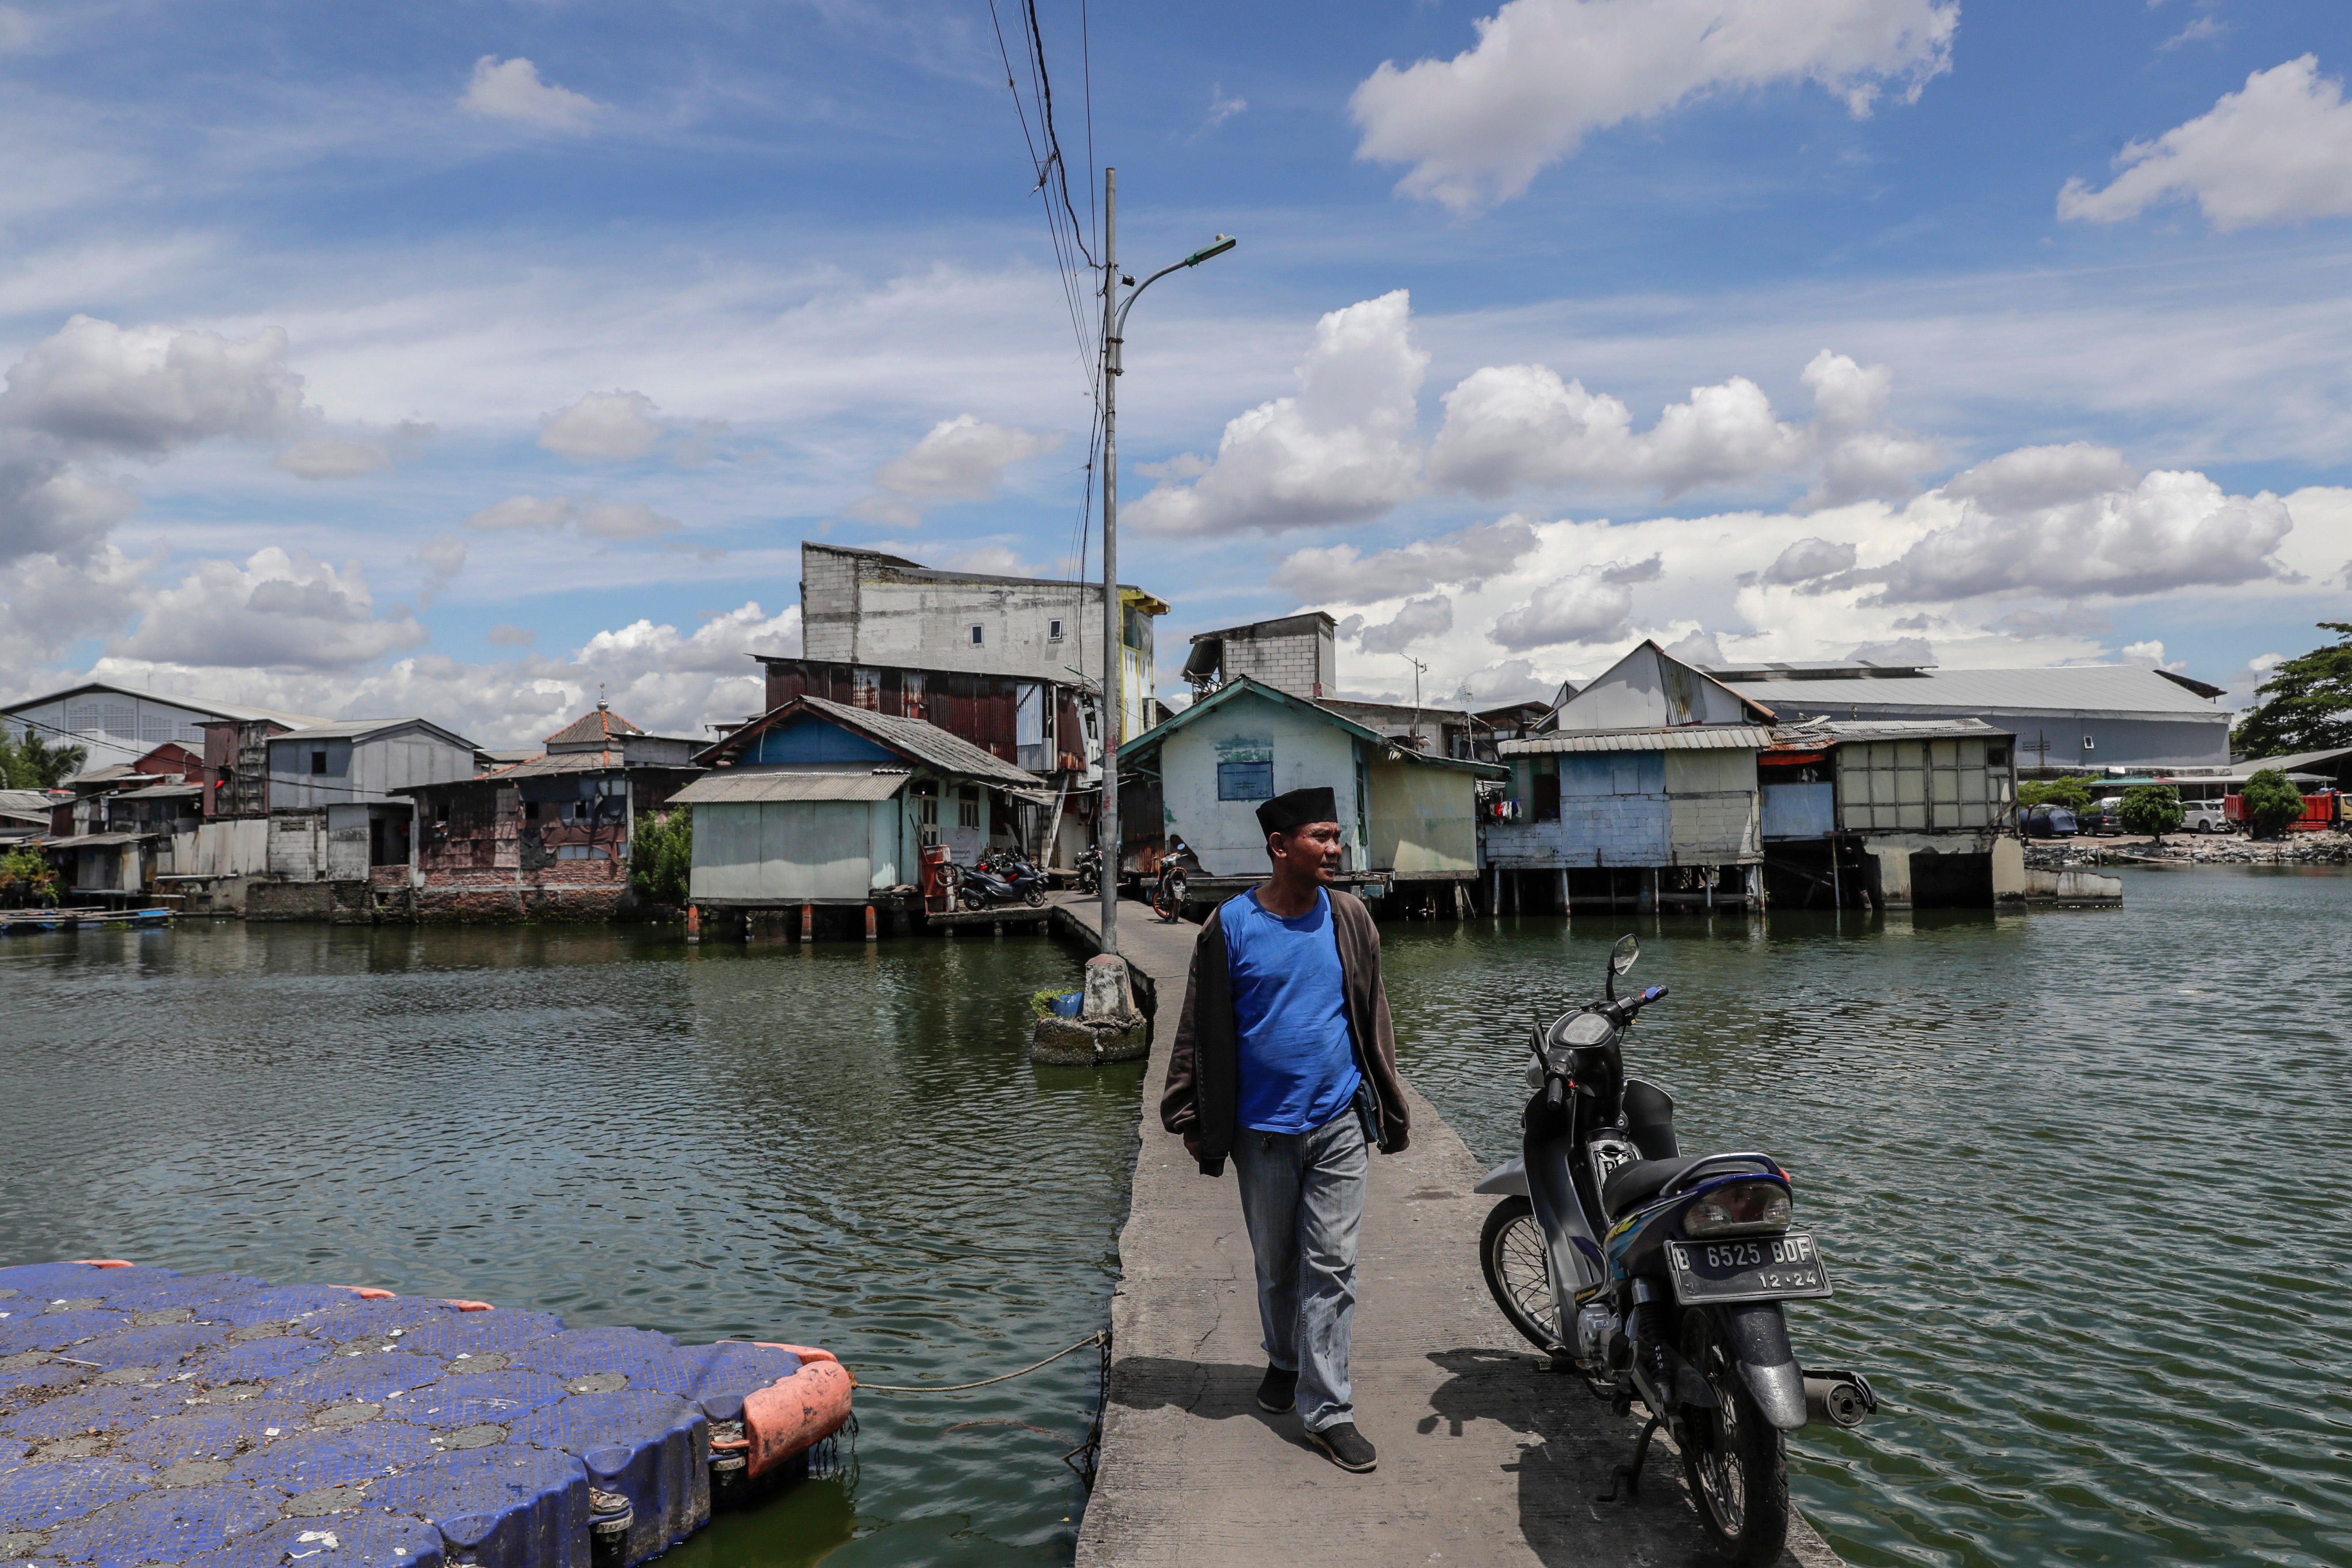 Susnandi Wahyu Budiawan Alatas walks on a path connecting the dry land with his floating village in Jakarta